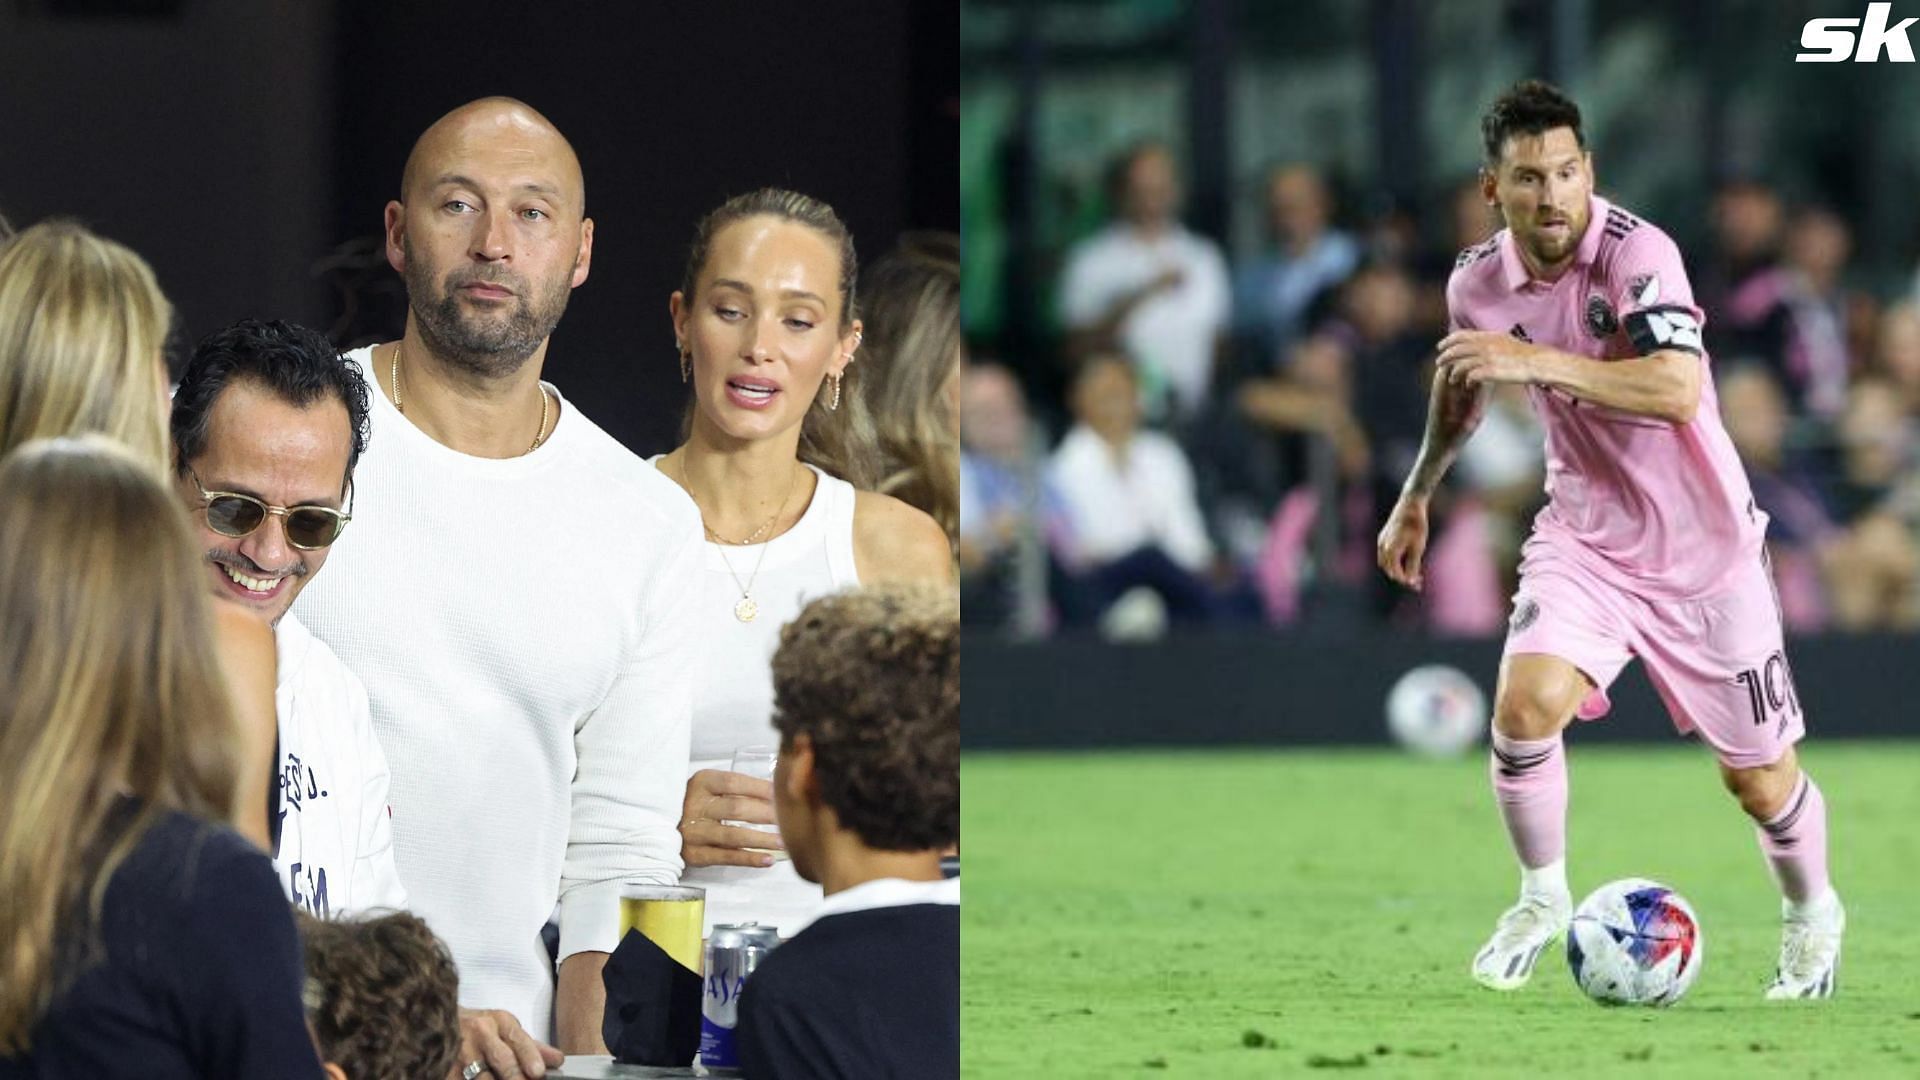 Derek Jeter heaps praise for Lionel Messi as Yankees legend attends his first soccer game in Miami